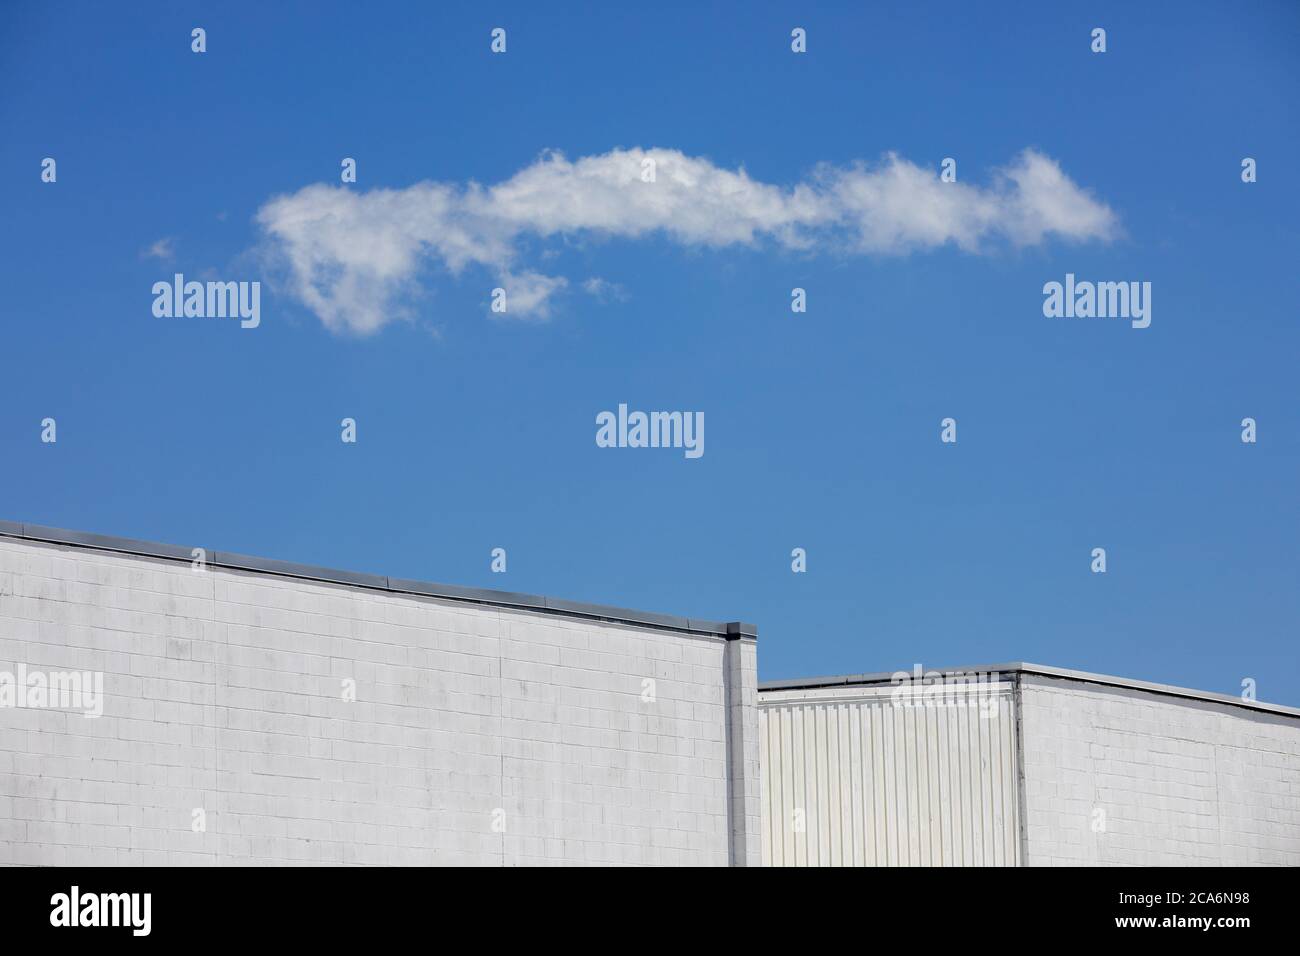 White Building and Cloud, USA. Stockfoto